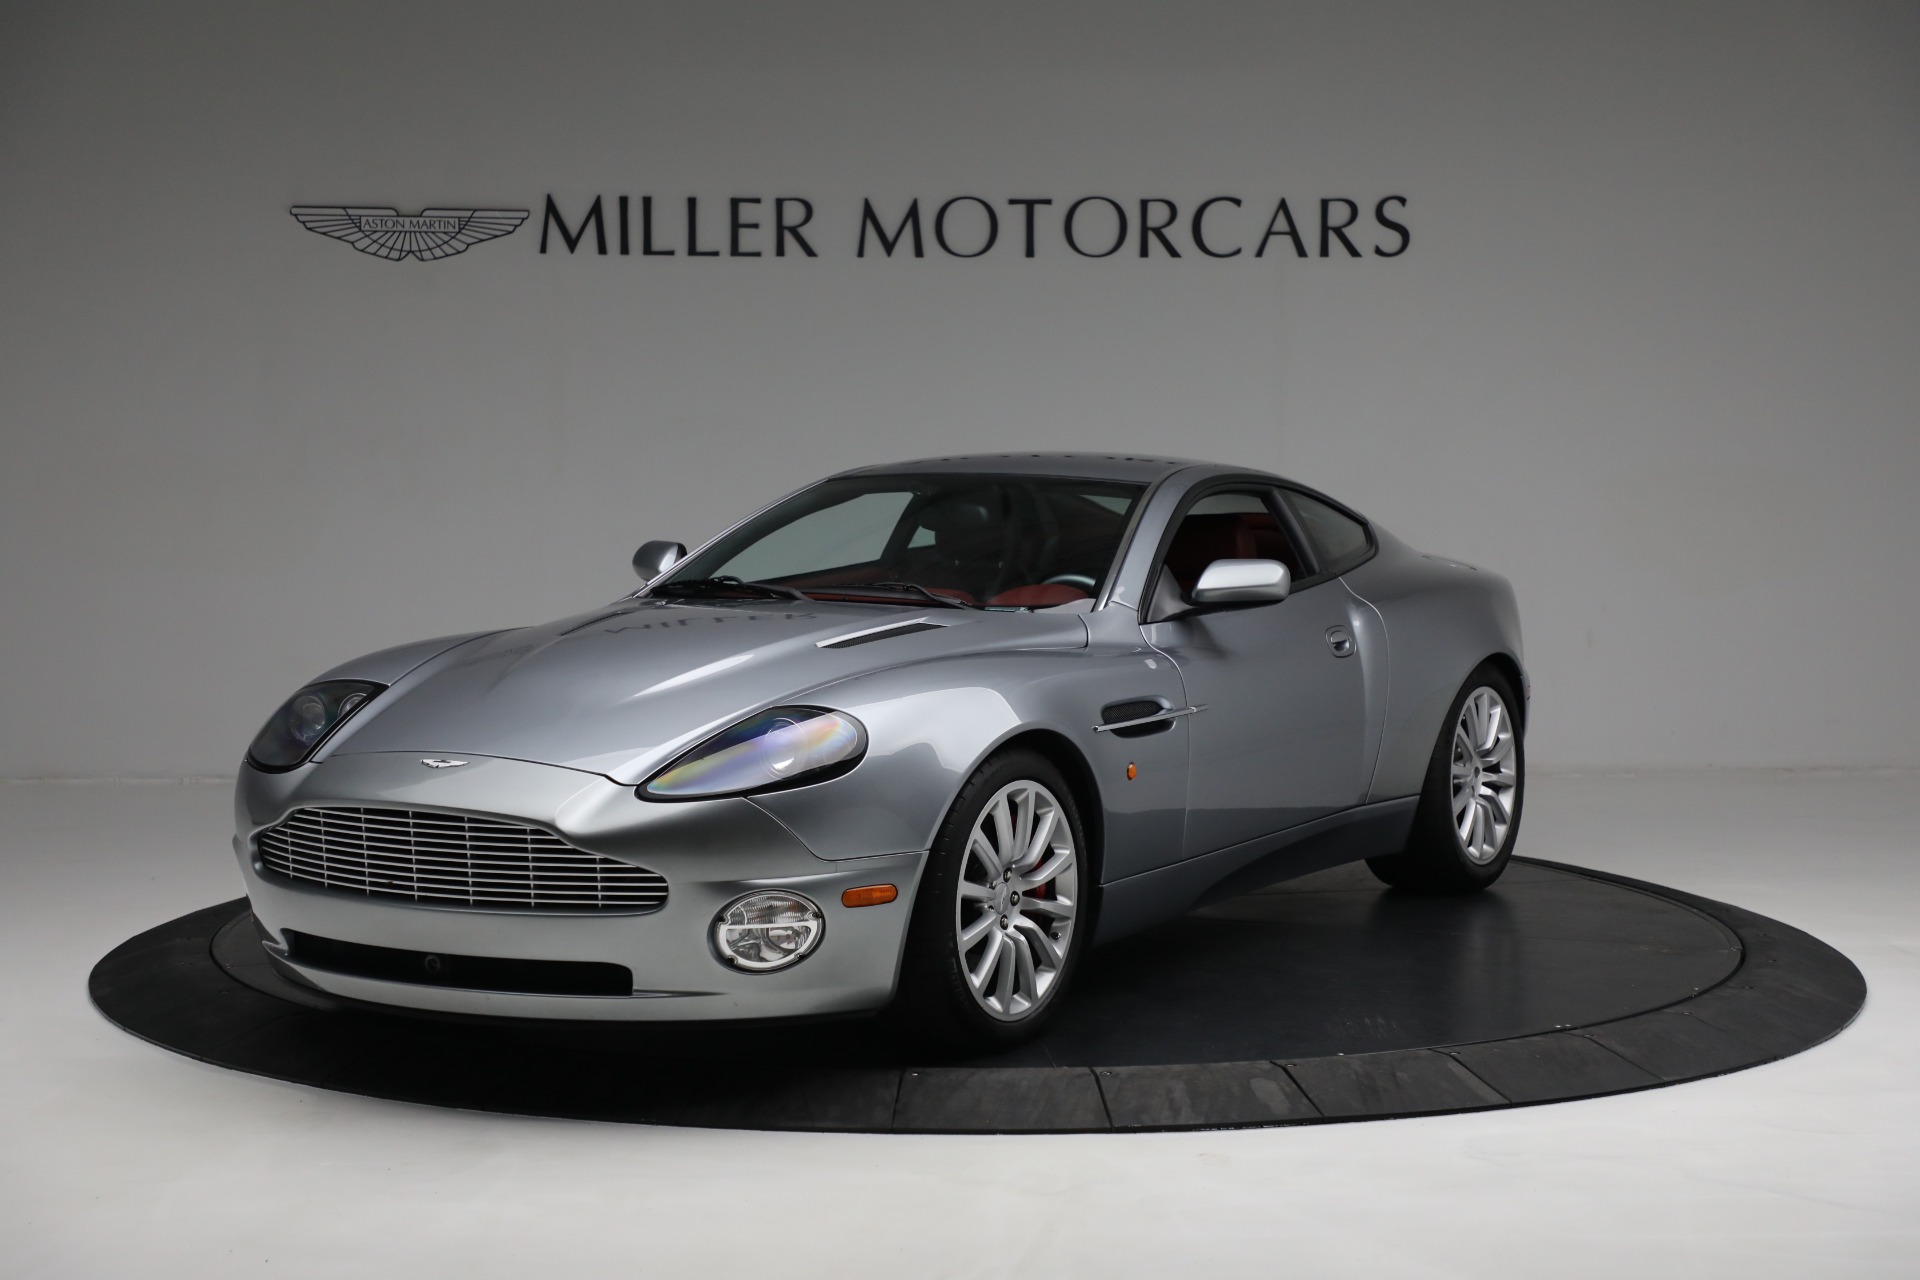 Used 2003 Aston Martin V12 Vanquish for sale $99,900 at Aston Martin of Greenwich in Greenwich CT 06830 1